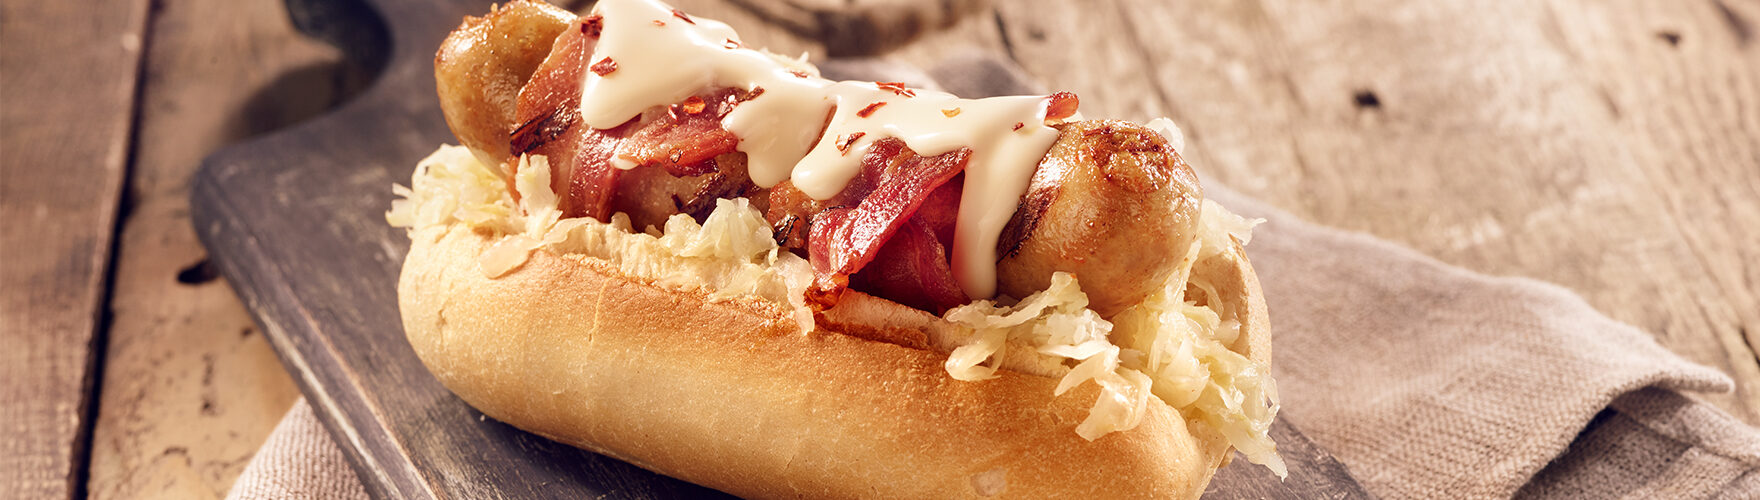 Hot dog with sauerkraut and bacon